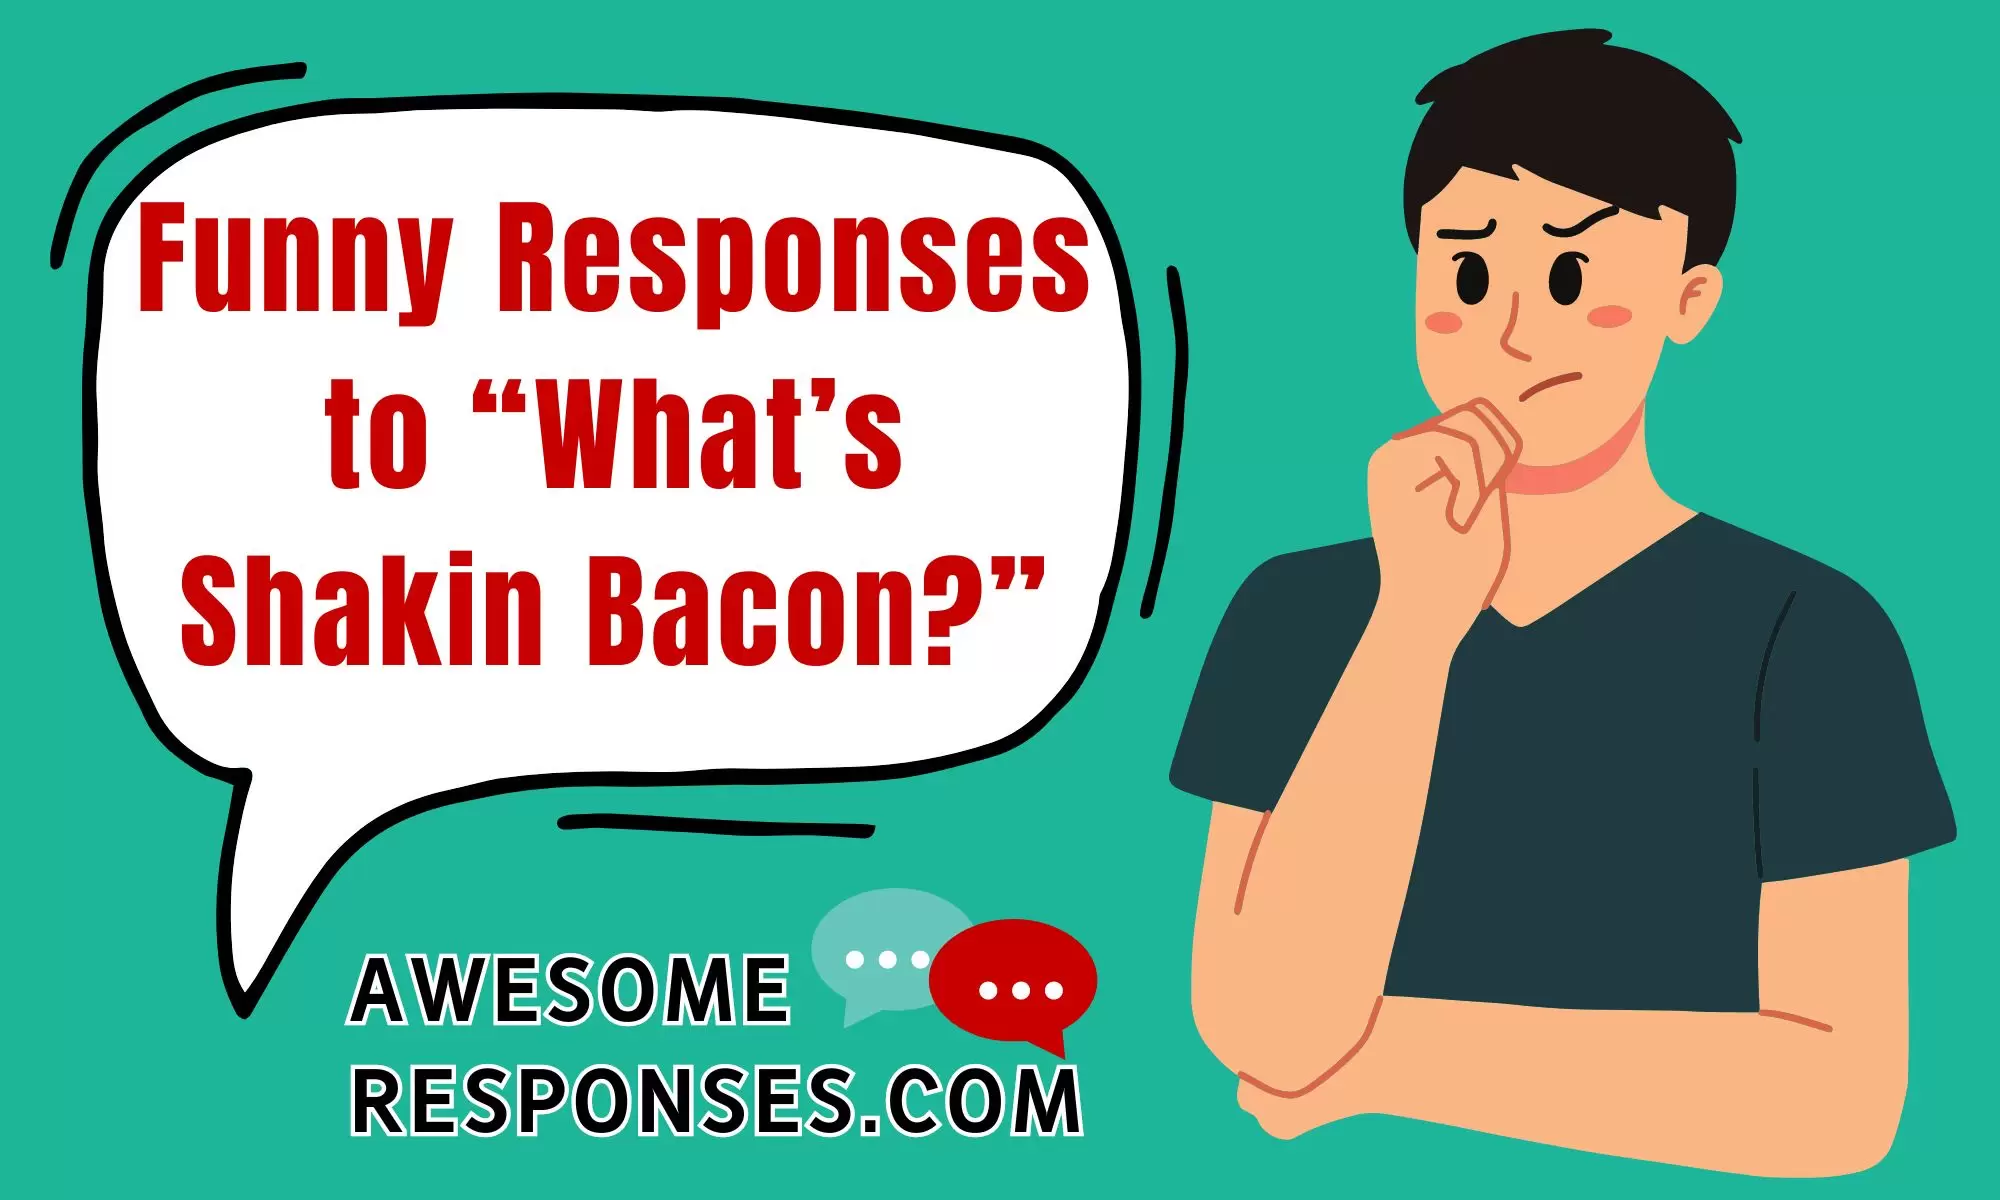 Funny Responses to “What’s Shakin Bacon?”